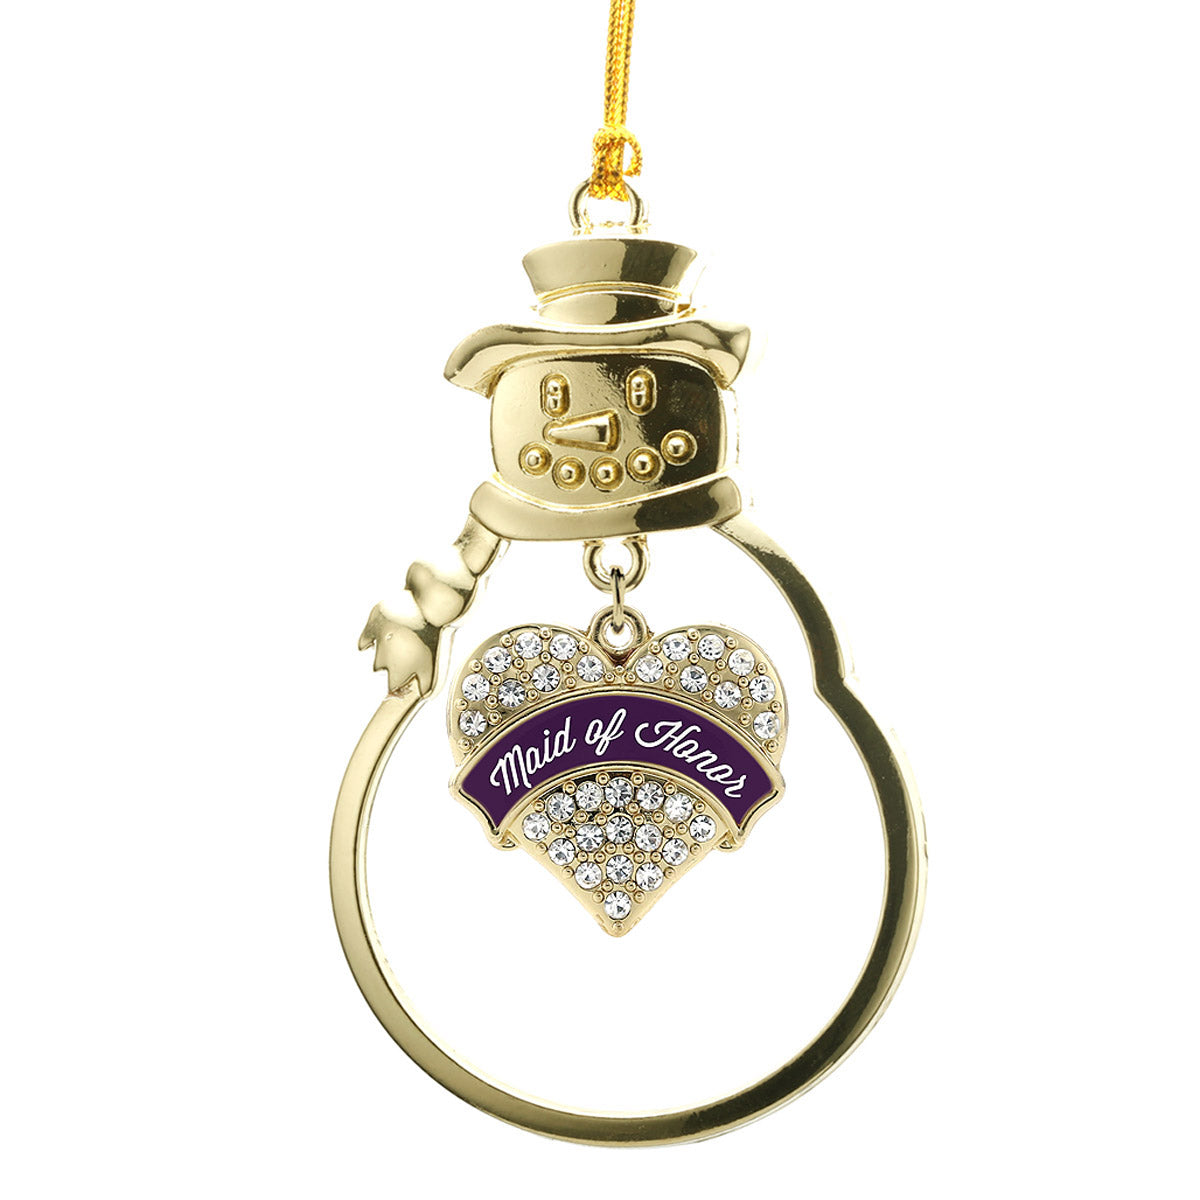 Gold Plum Maid of Honor Pave Heart Charm Snowman Ornament